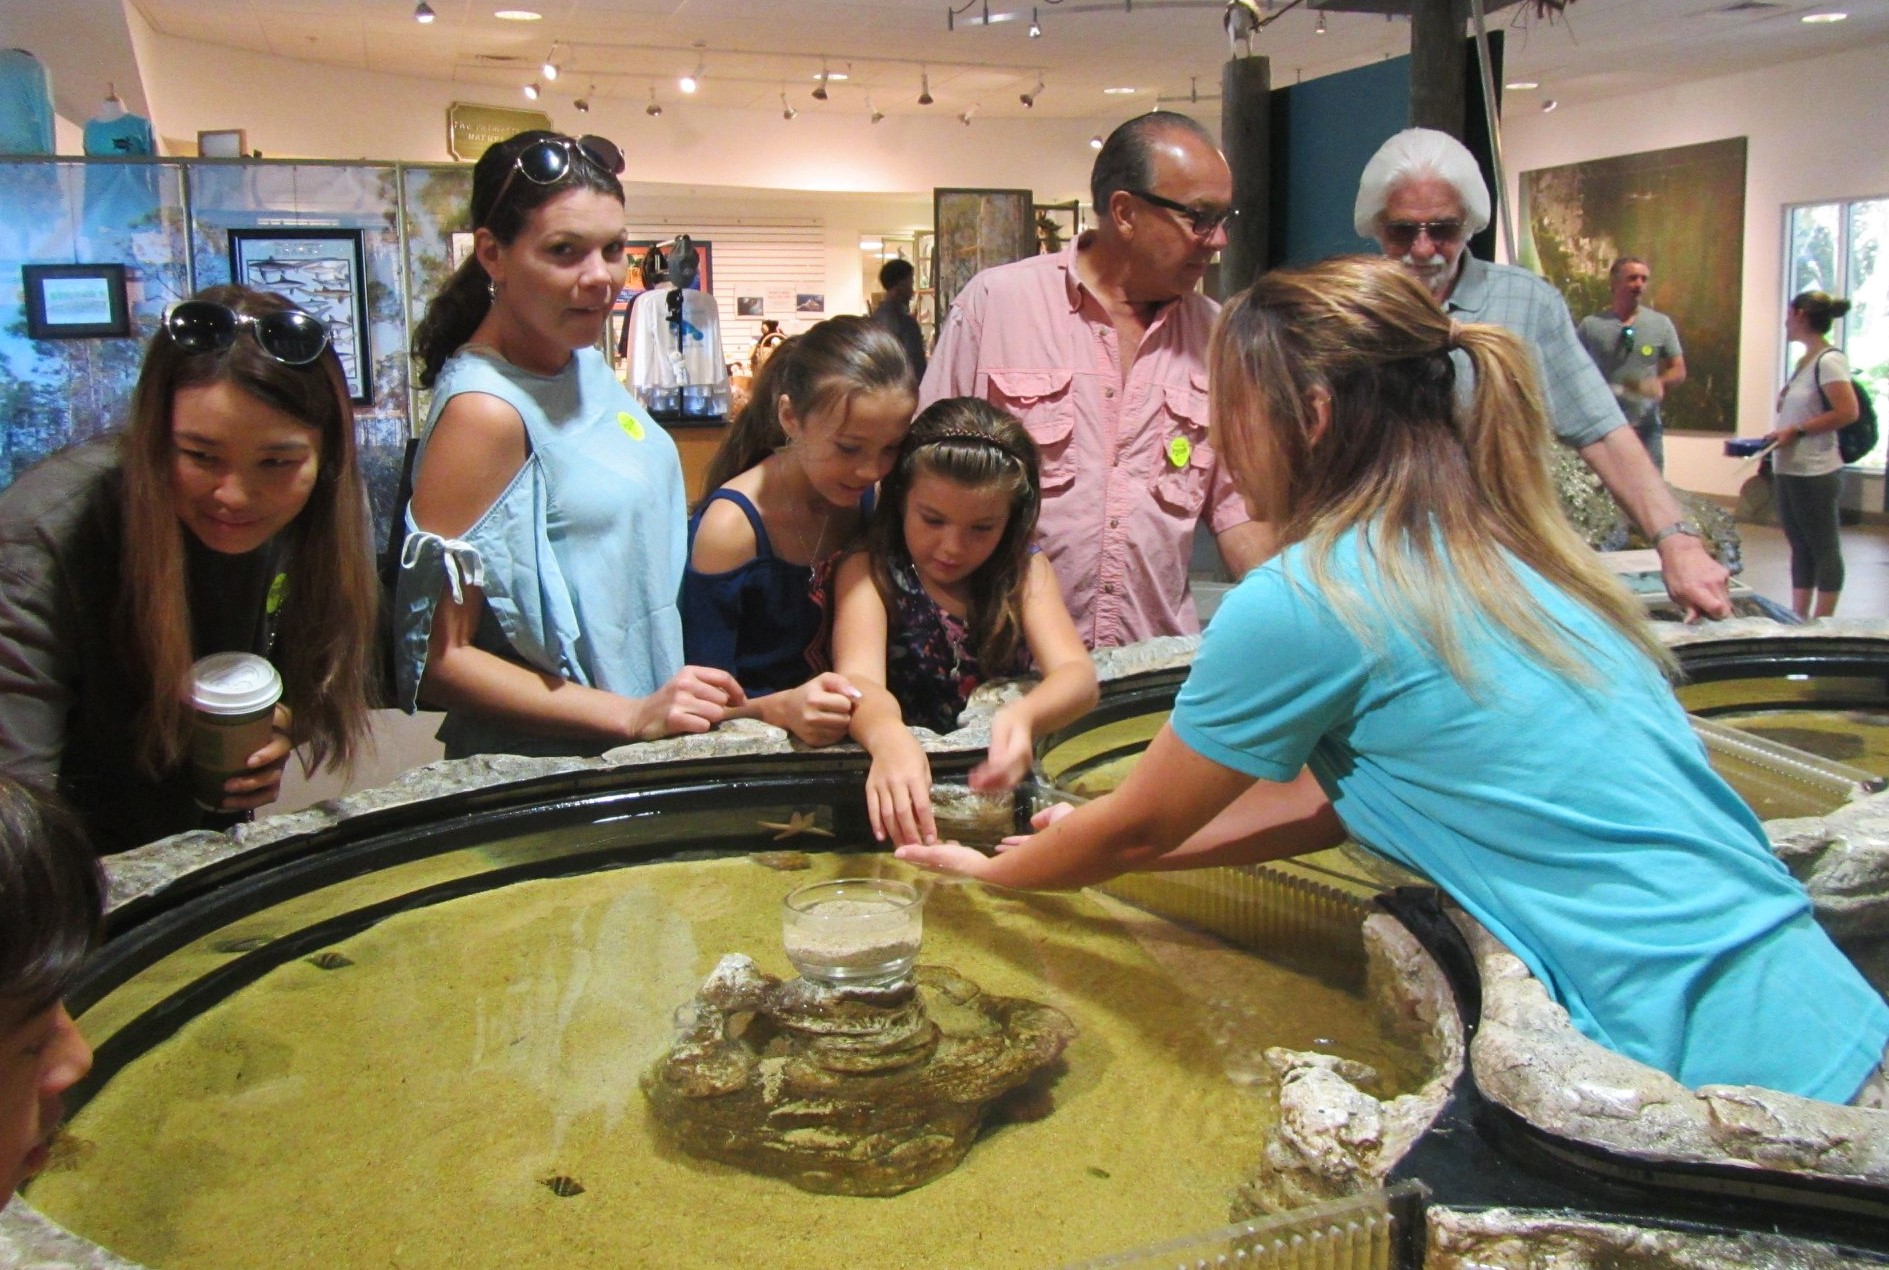 Children interact with some of Florida’s local marine life through a touch tank. The Rookery Bay National Estuarine Research Reserve celebrated National Estuaries Day on September 29 by inviting the public to experience the estuary through crafts, exhibits, kayaks, boat rides, and more—all free of charge.